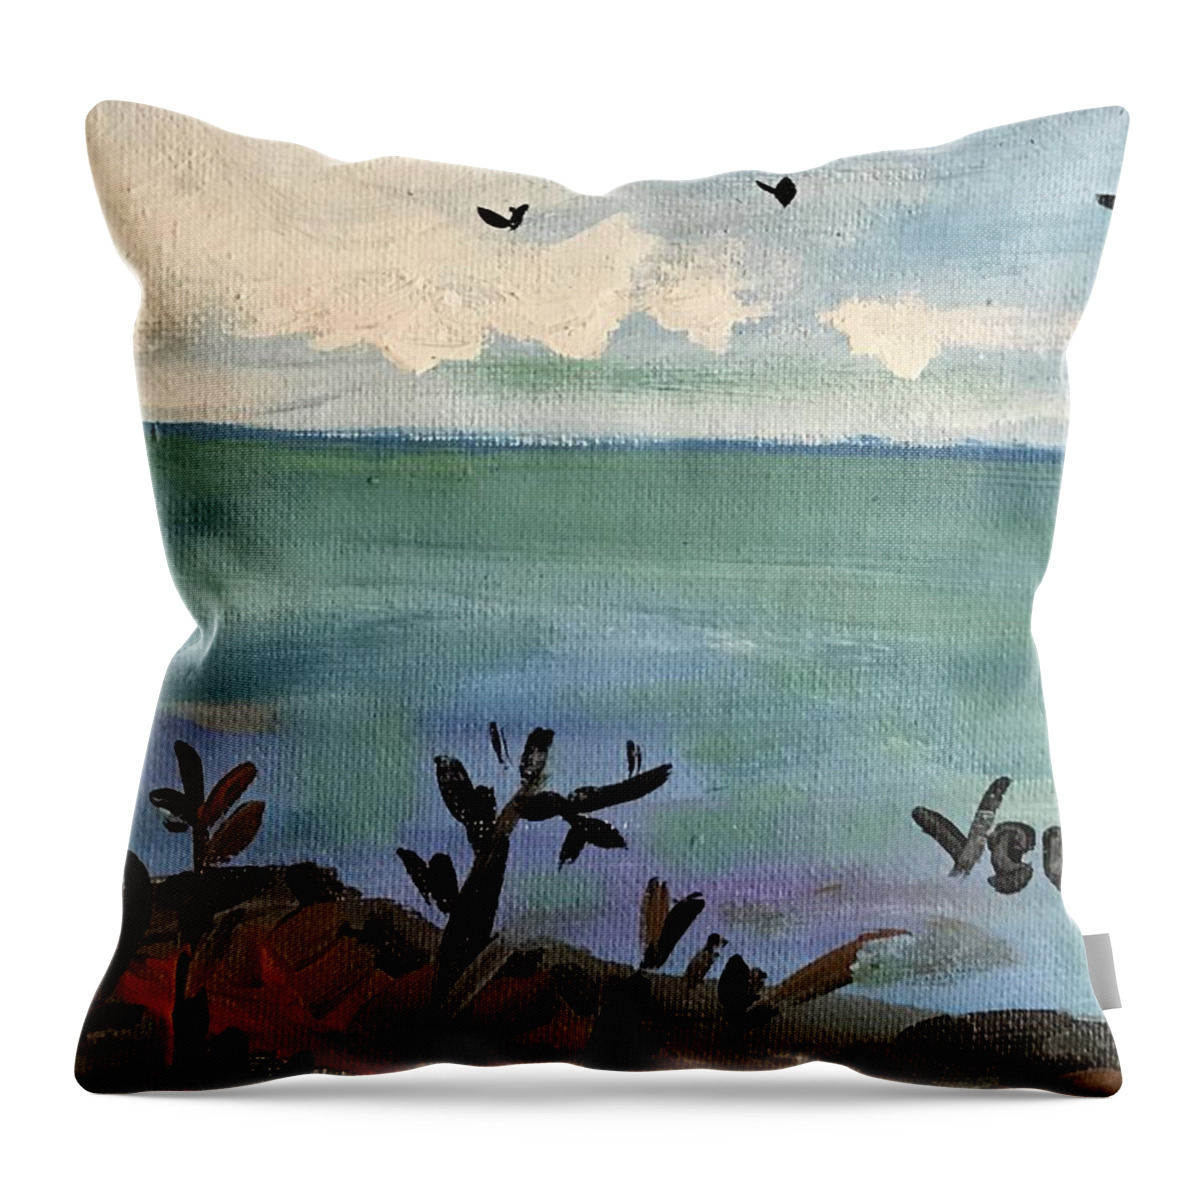 Ocean Throw Pillow featuring the painting I Stood There And Watched It All by Clare Ventura